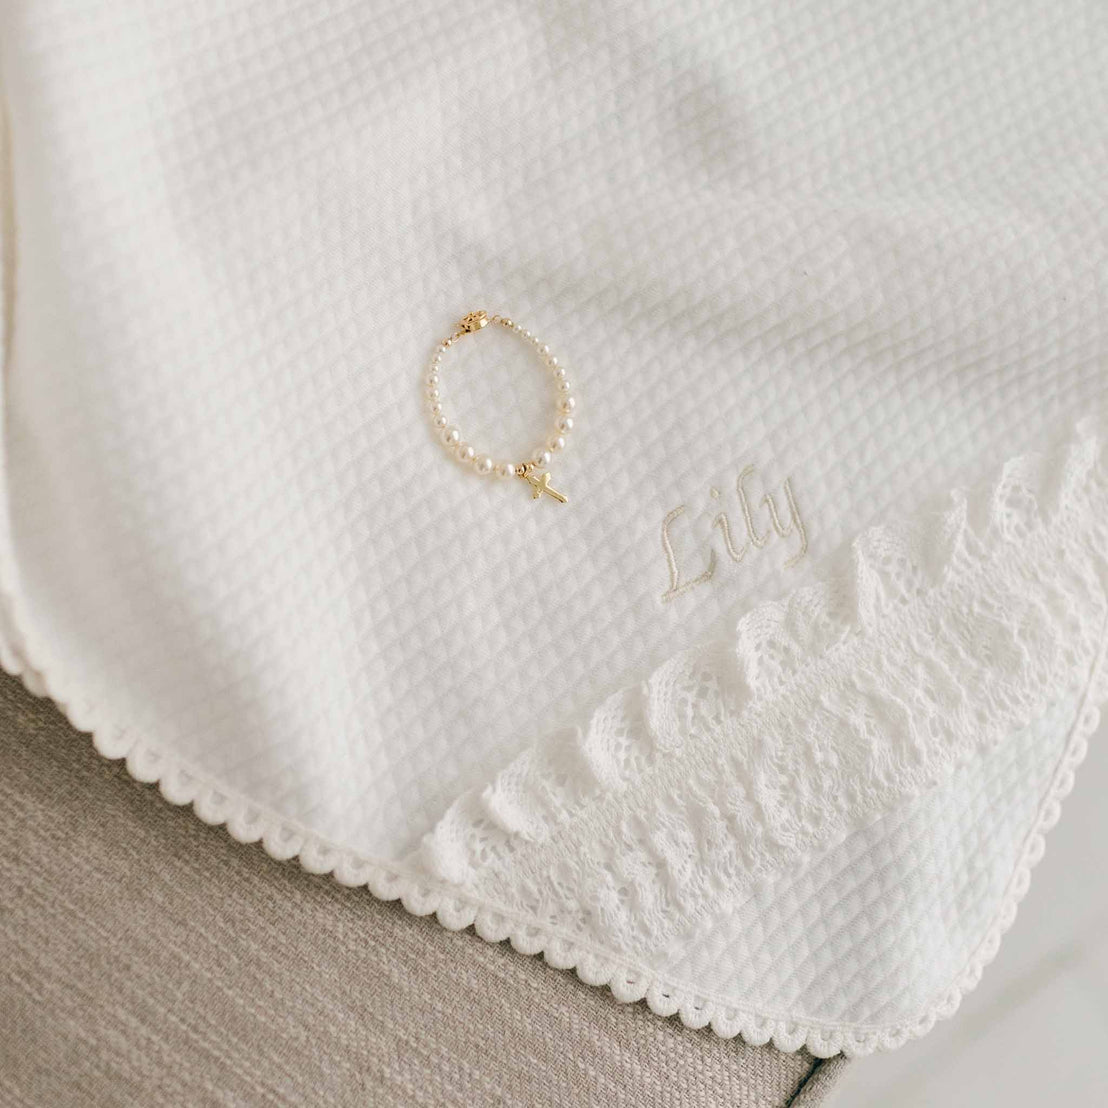 A closer photo detail of the Lily Personalized Blanket. The photo showcases 100% light ivory textured cotton and the corner of the blanket made with ivory lace. The name "Lily" is stitched in champagne thread into the blanket. On the blanket is a bracelet with a cross attached